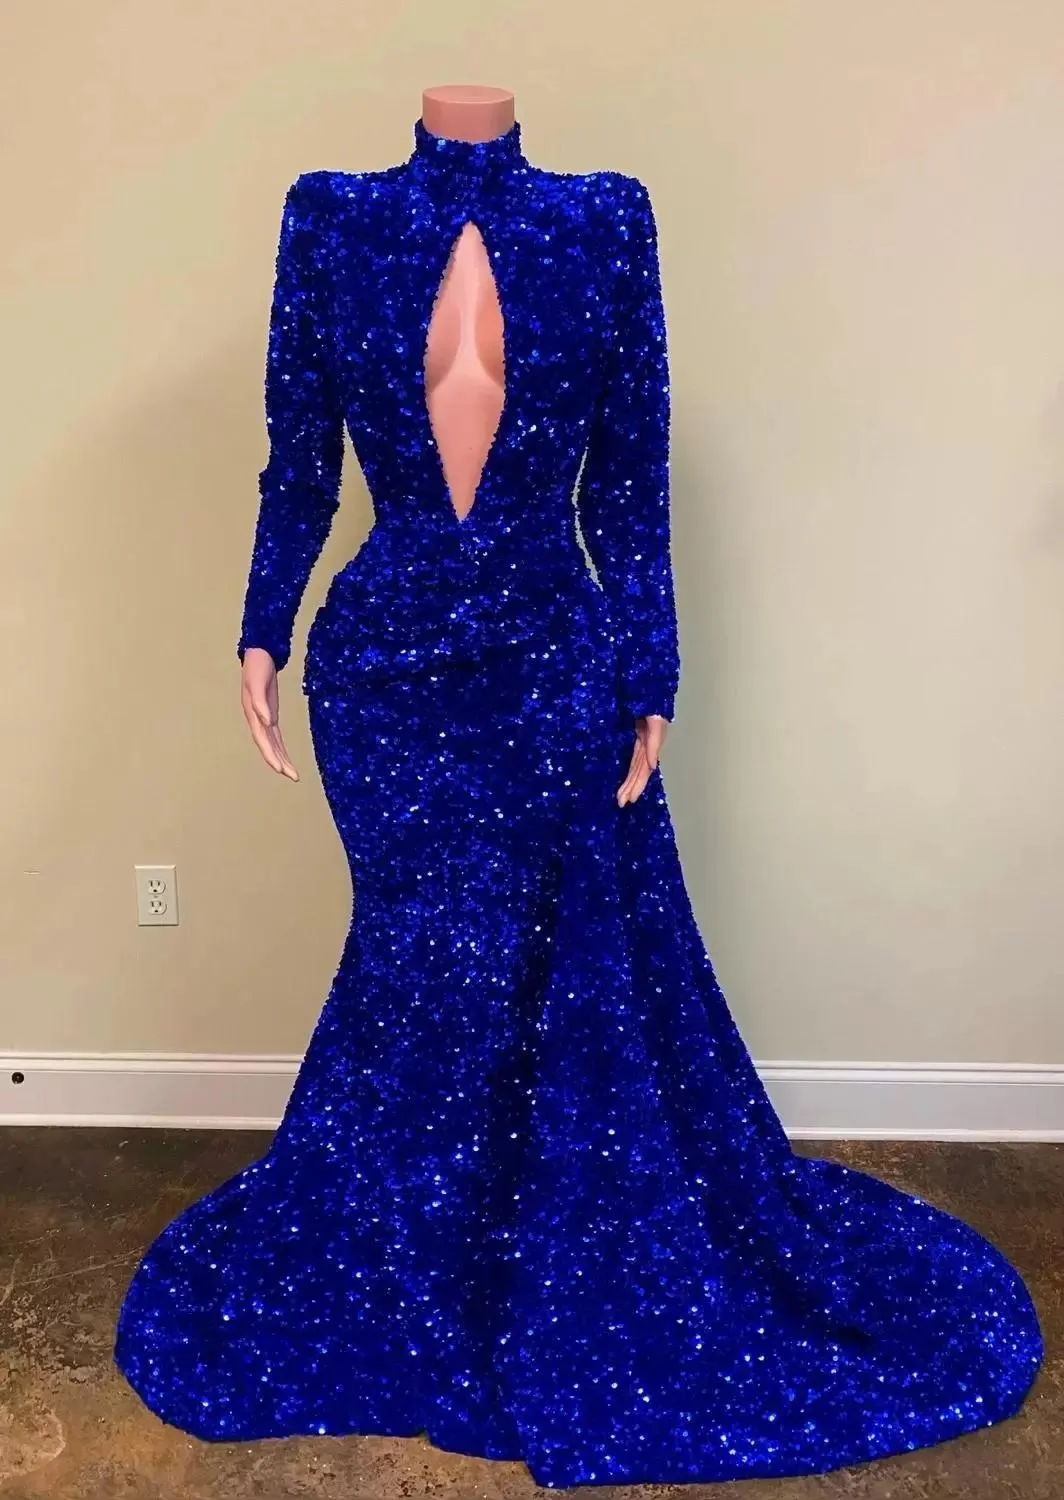 2022 Sexig Bling Royal Blue Prom Dresses High Neck Keyhole Velvet Glittering Sequined Lace Sequins Overkirts Zipper Back Party Dress Evening Gowns